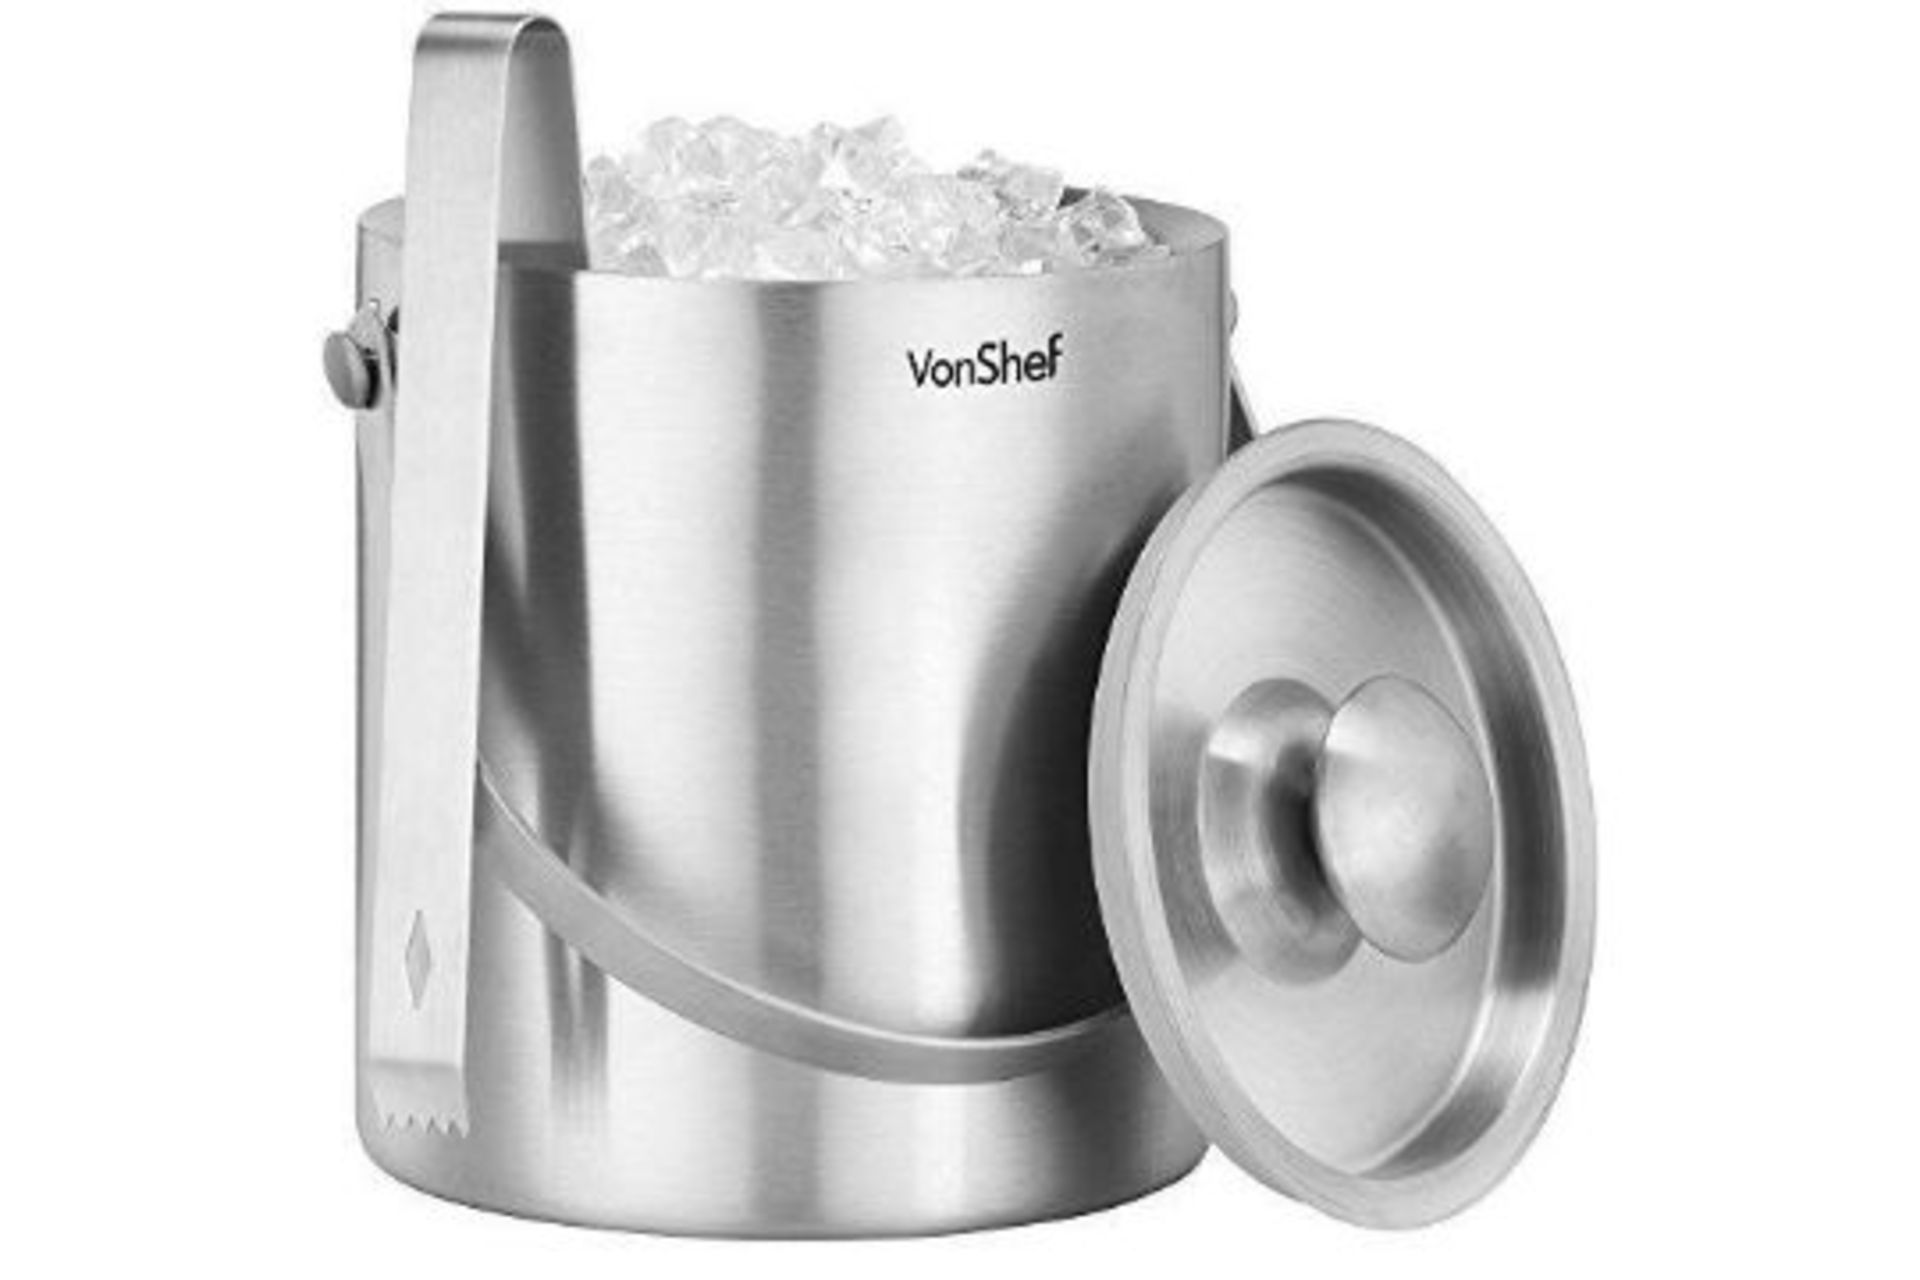 Stainless Steel Ice Bucket with Tongs (SR3 BW)Ice is an essential component of everything from the